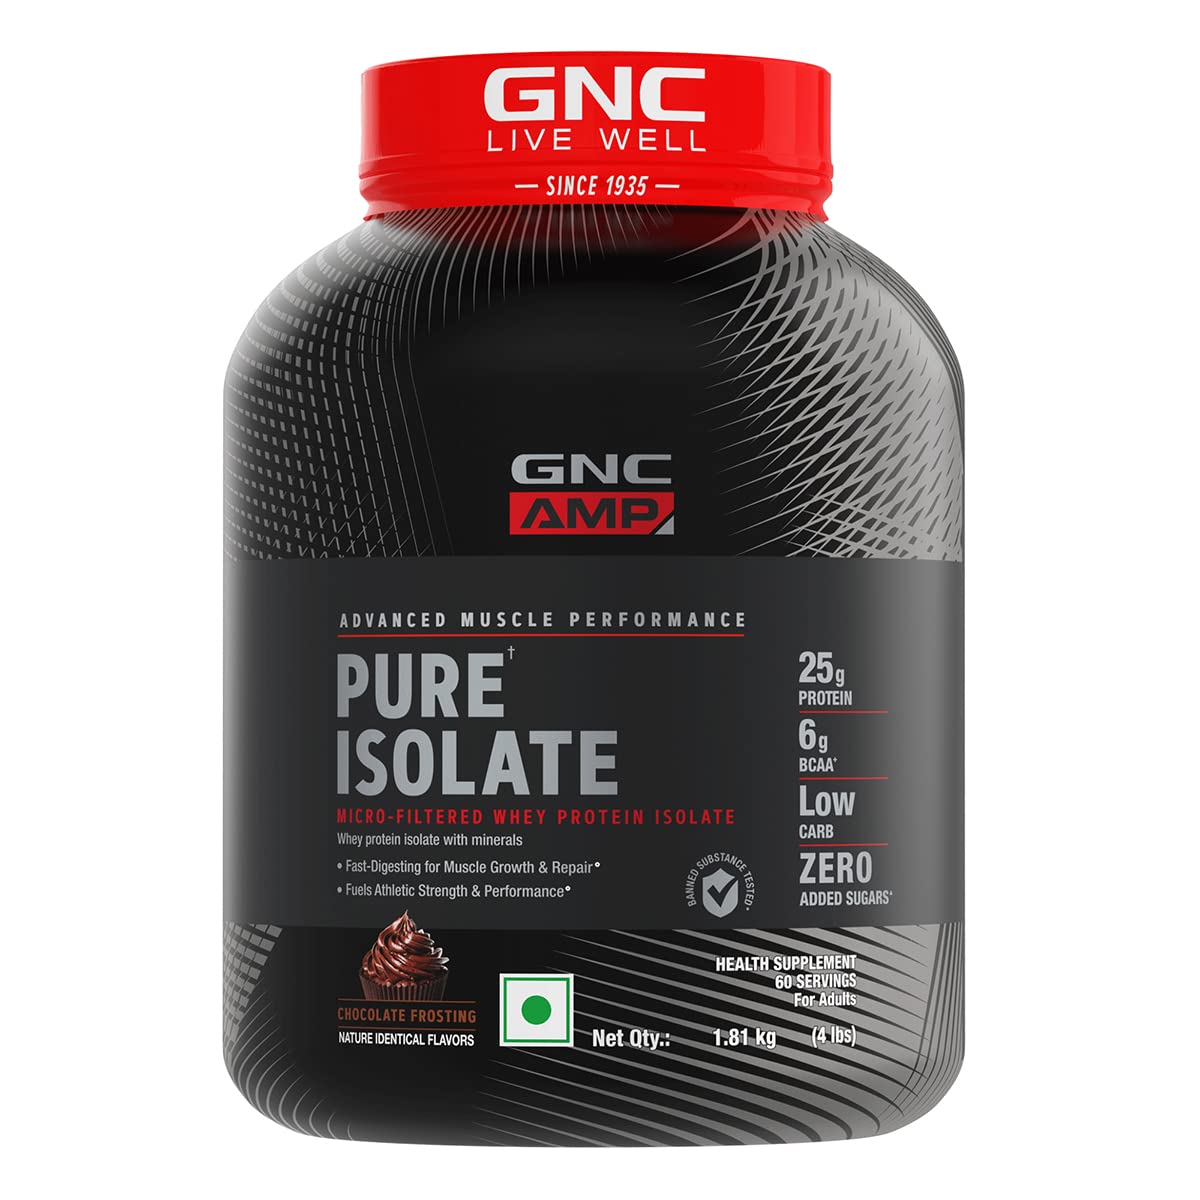 Buy GNC AMP Pure Isolate Whey Protein Chocolate Frosting Flavour Powder, 1.81 kg Online